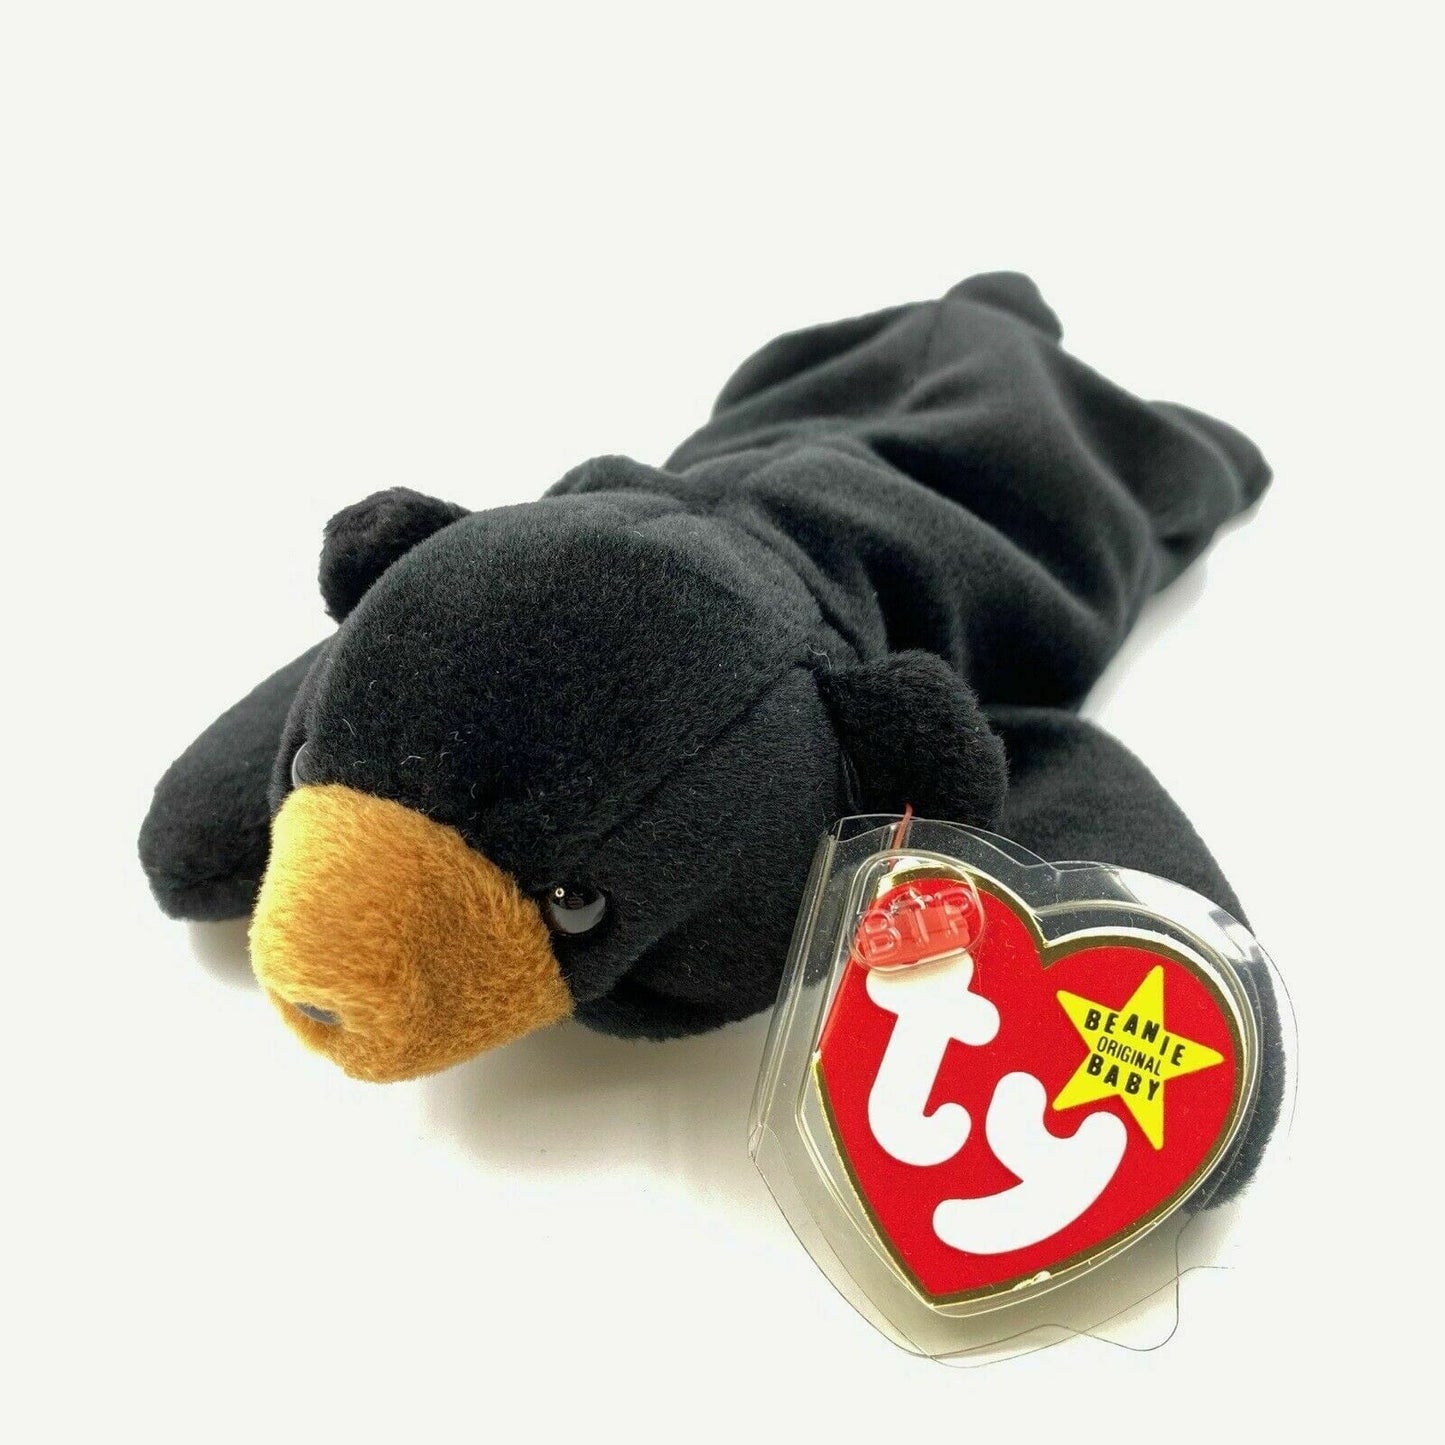 Charming Ty Original Beanie Babies Blackie The Bear Plush Toy - Excellent Cond. - Vintage